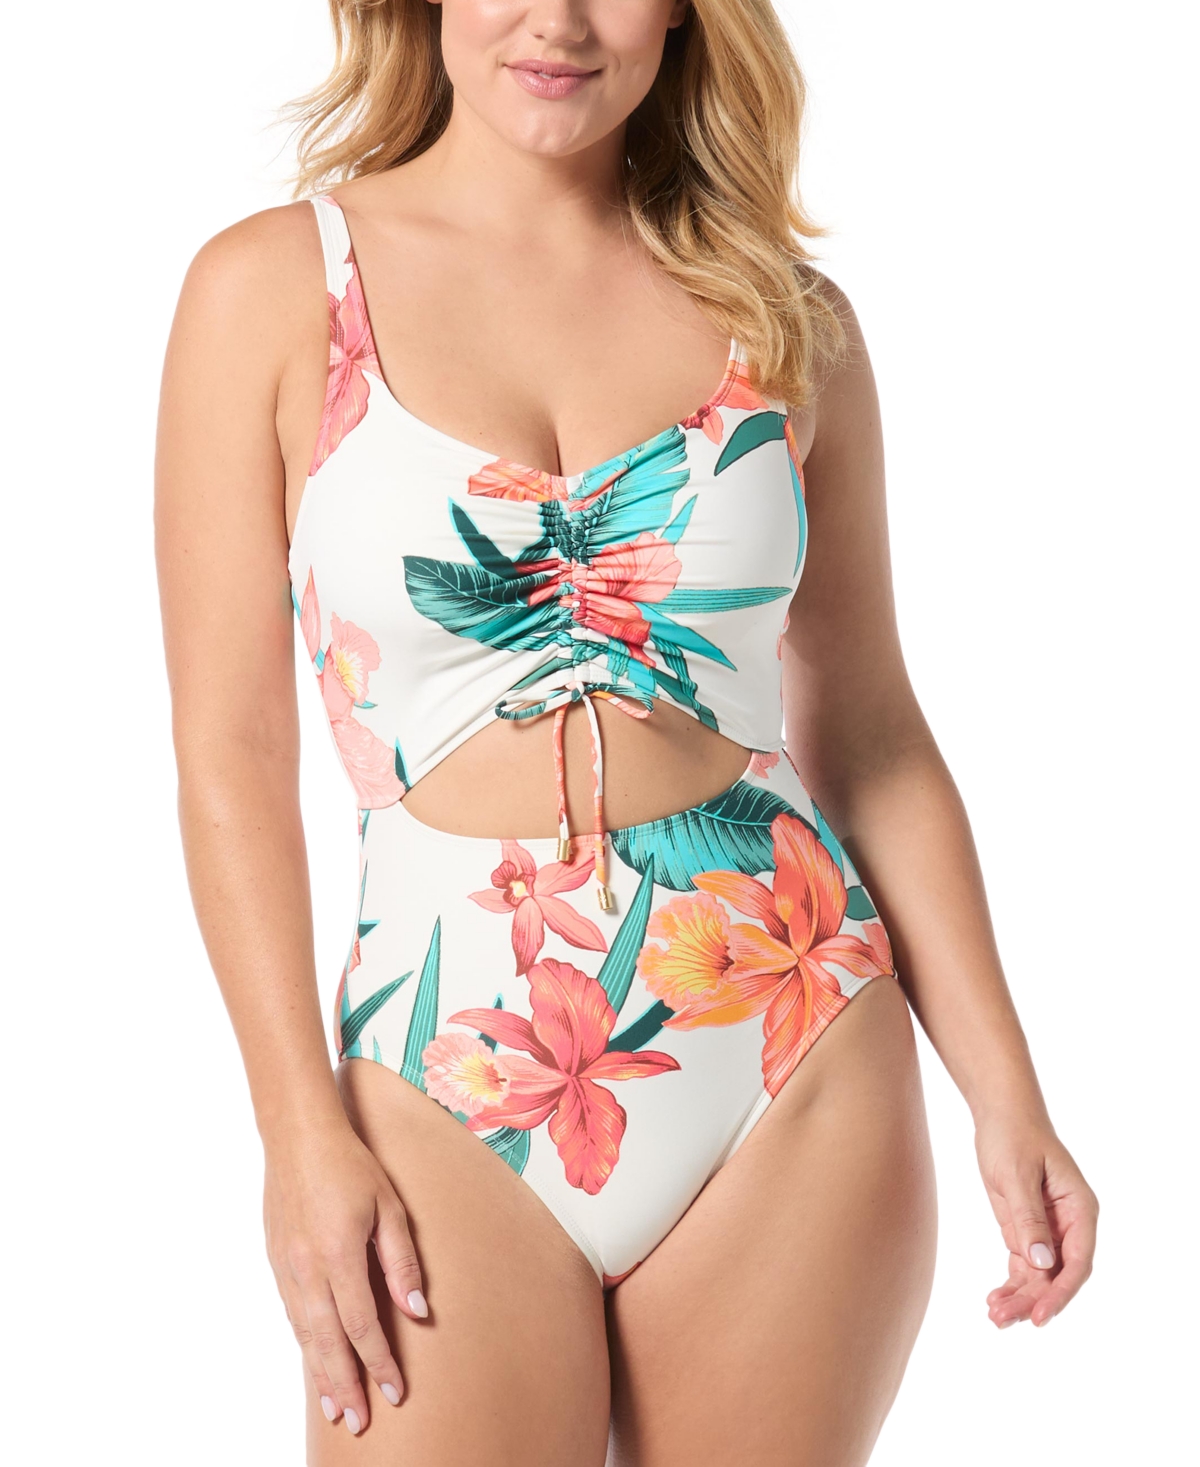 Sassy Printed Cut-Out Ruched One-Piece Swimsuit - White